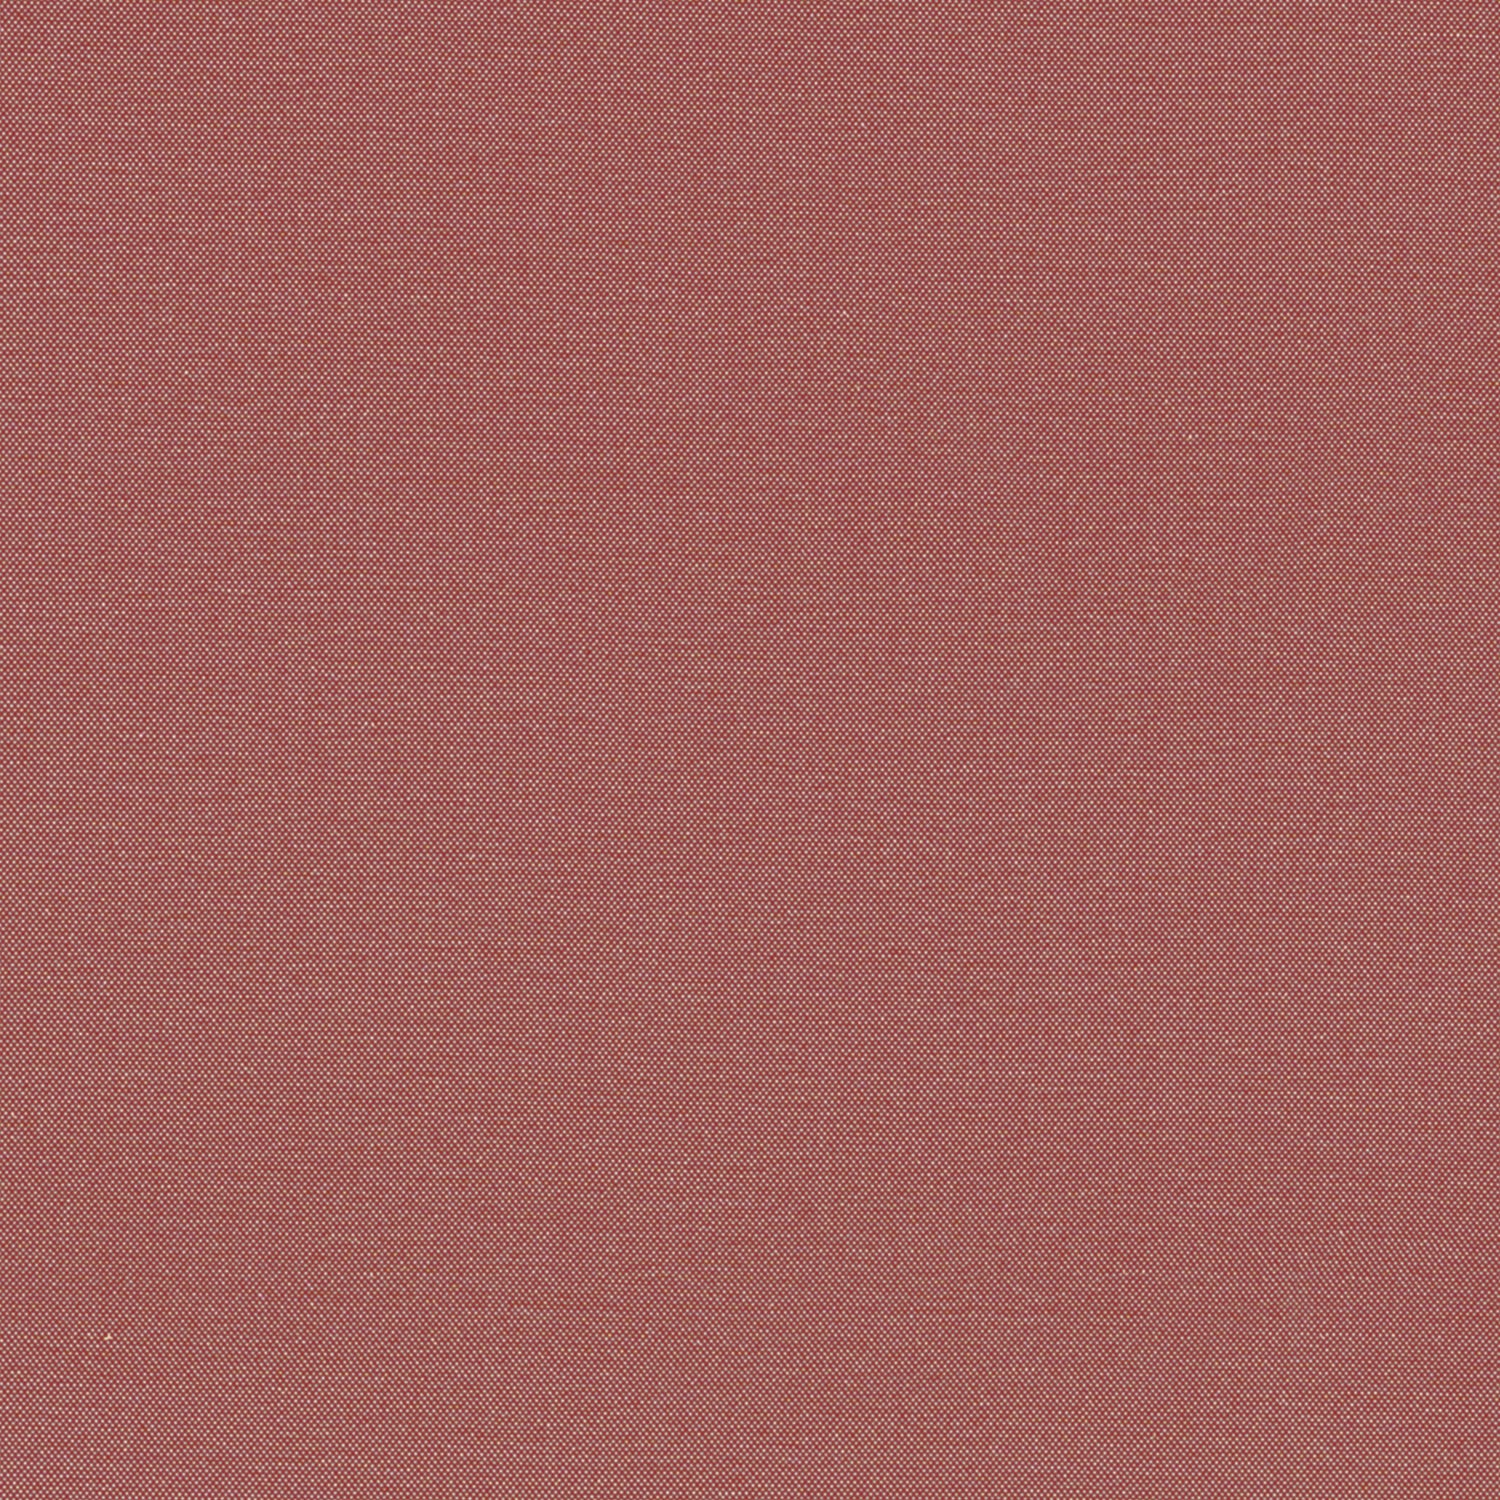 Tessa fabric in russet color - pattern number W81653 - by Thibaut in the Locale collection